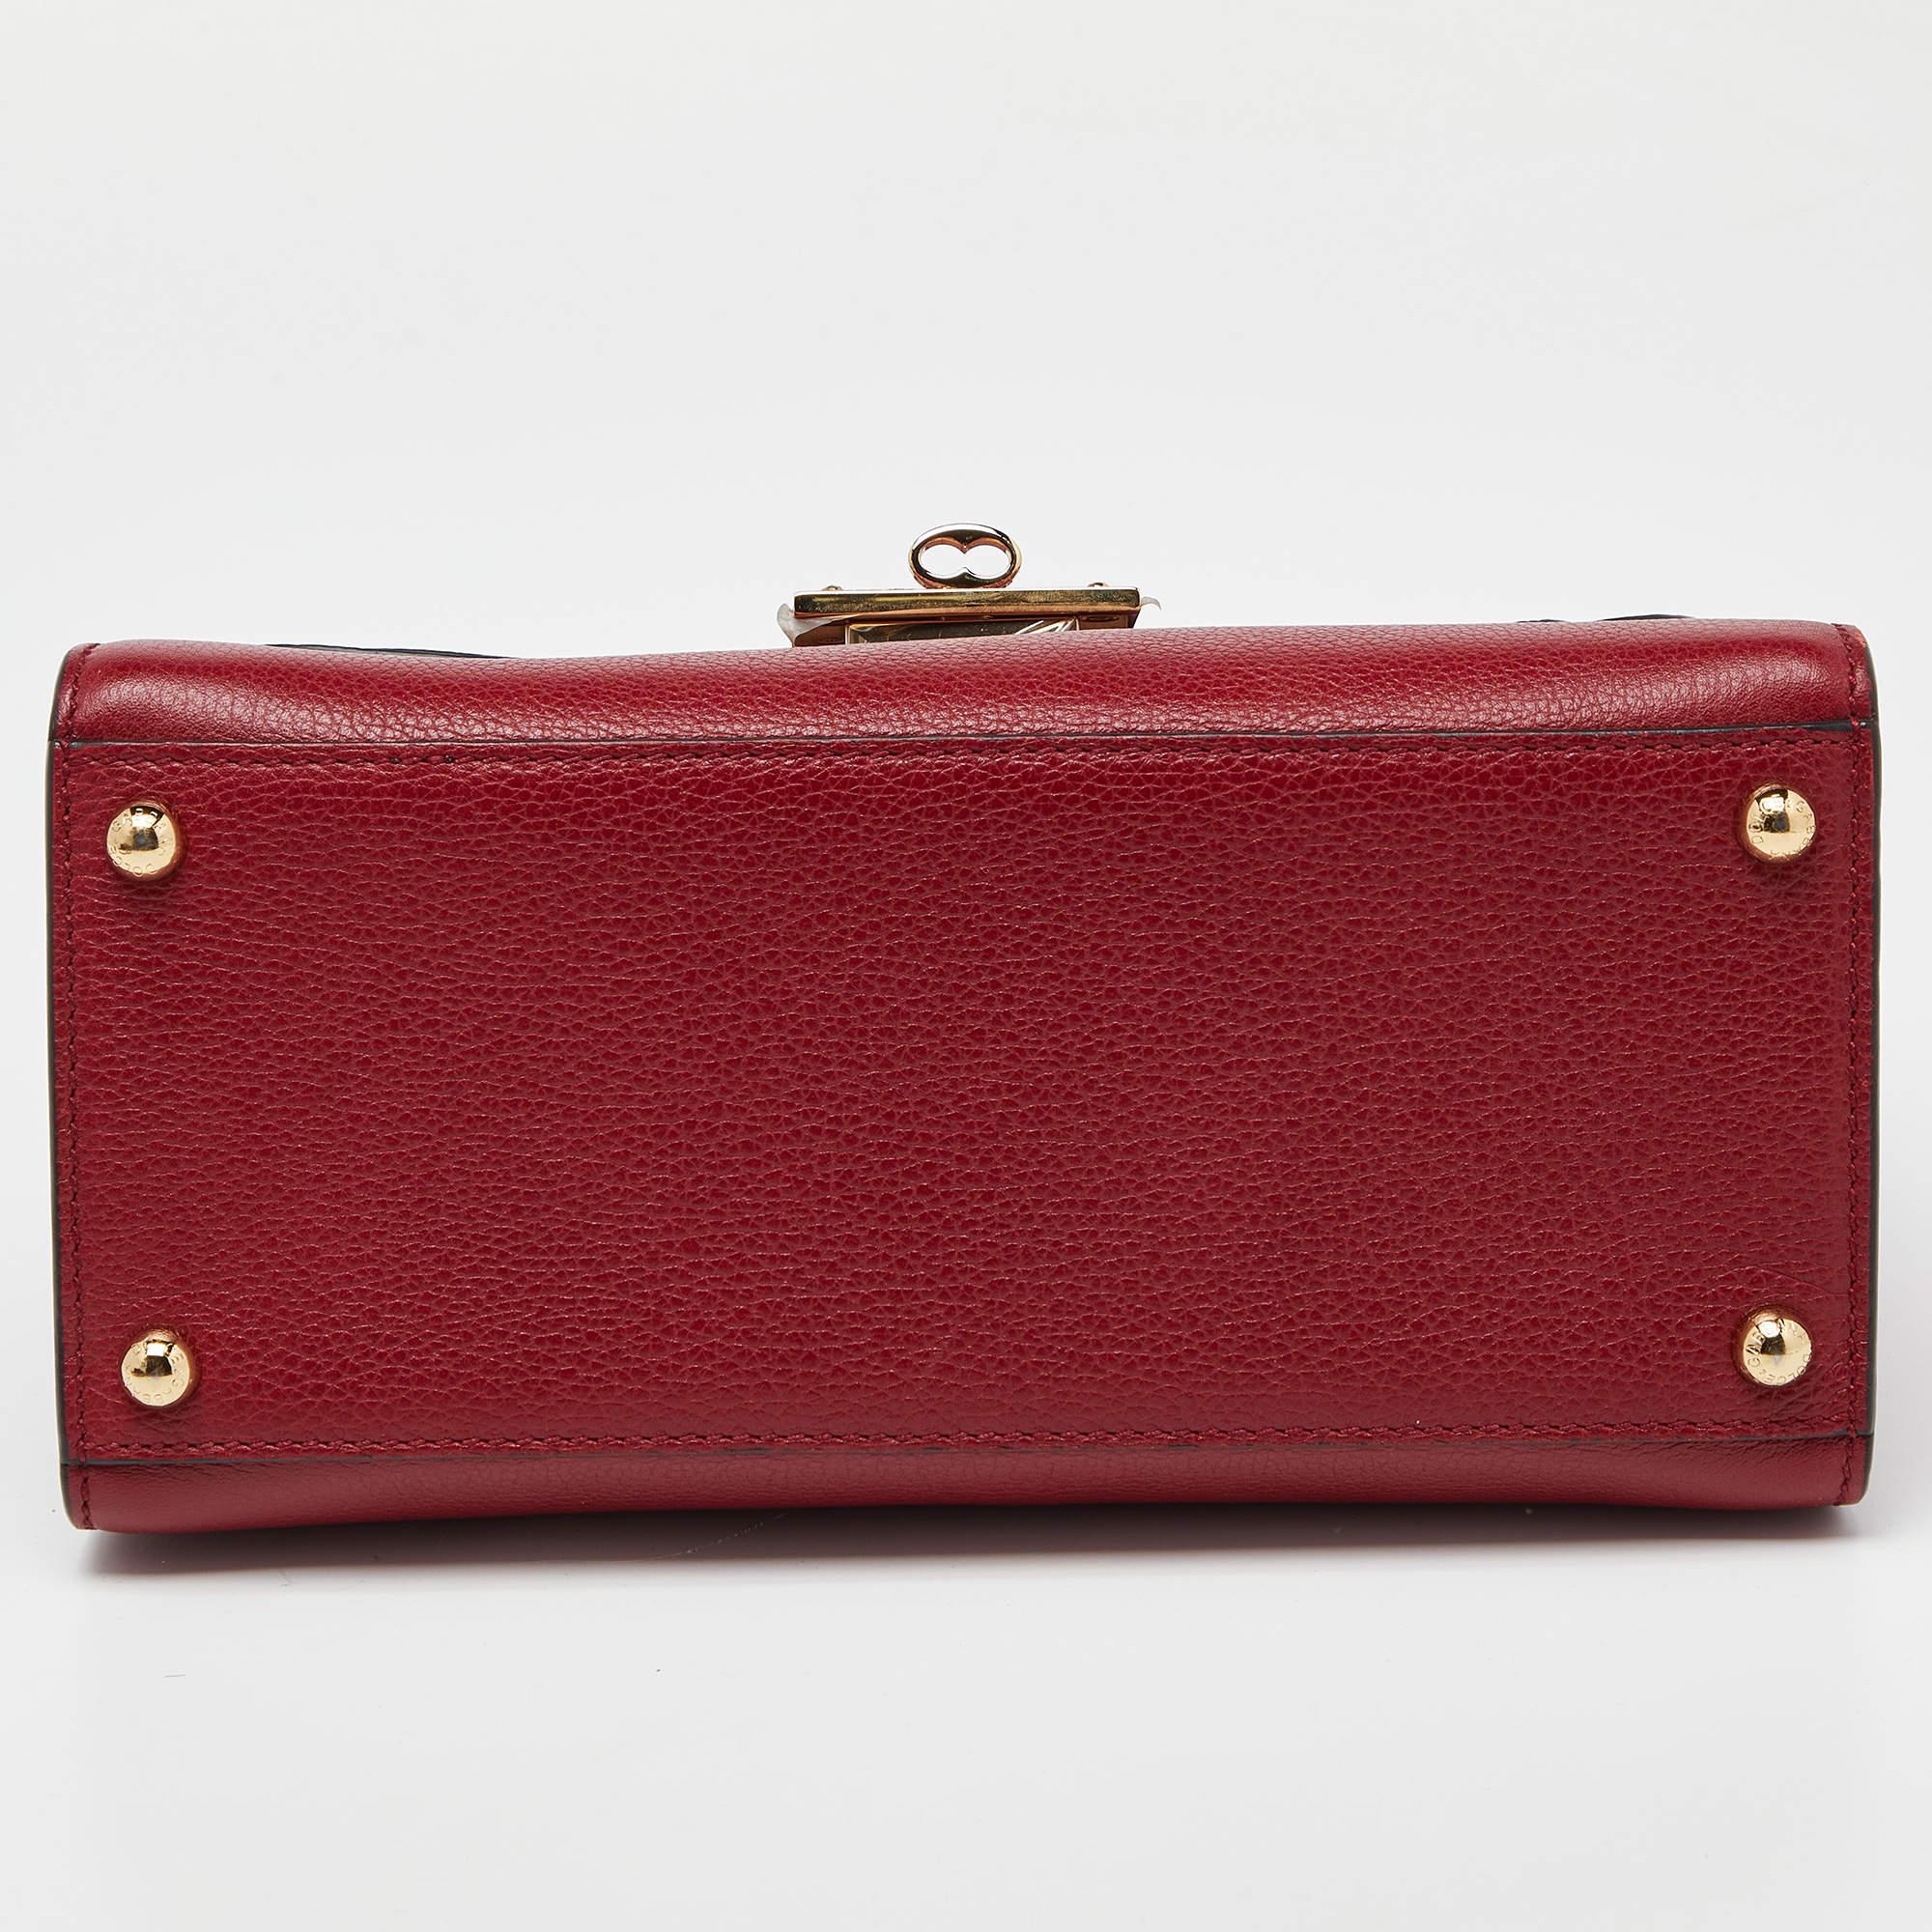 Dolce & Gabbana Red Leather Greta Top Handle Bag For Sale 1